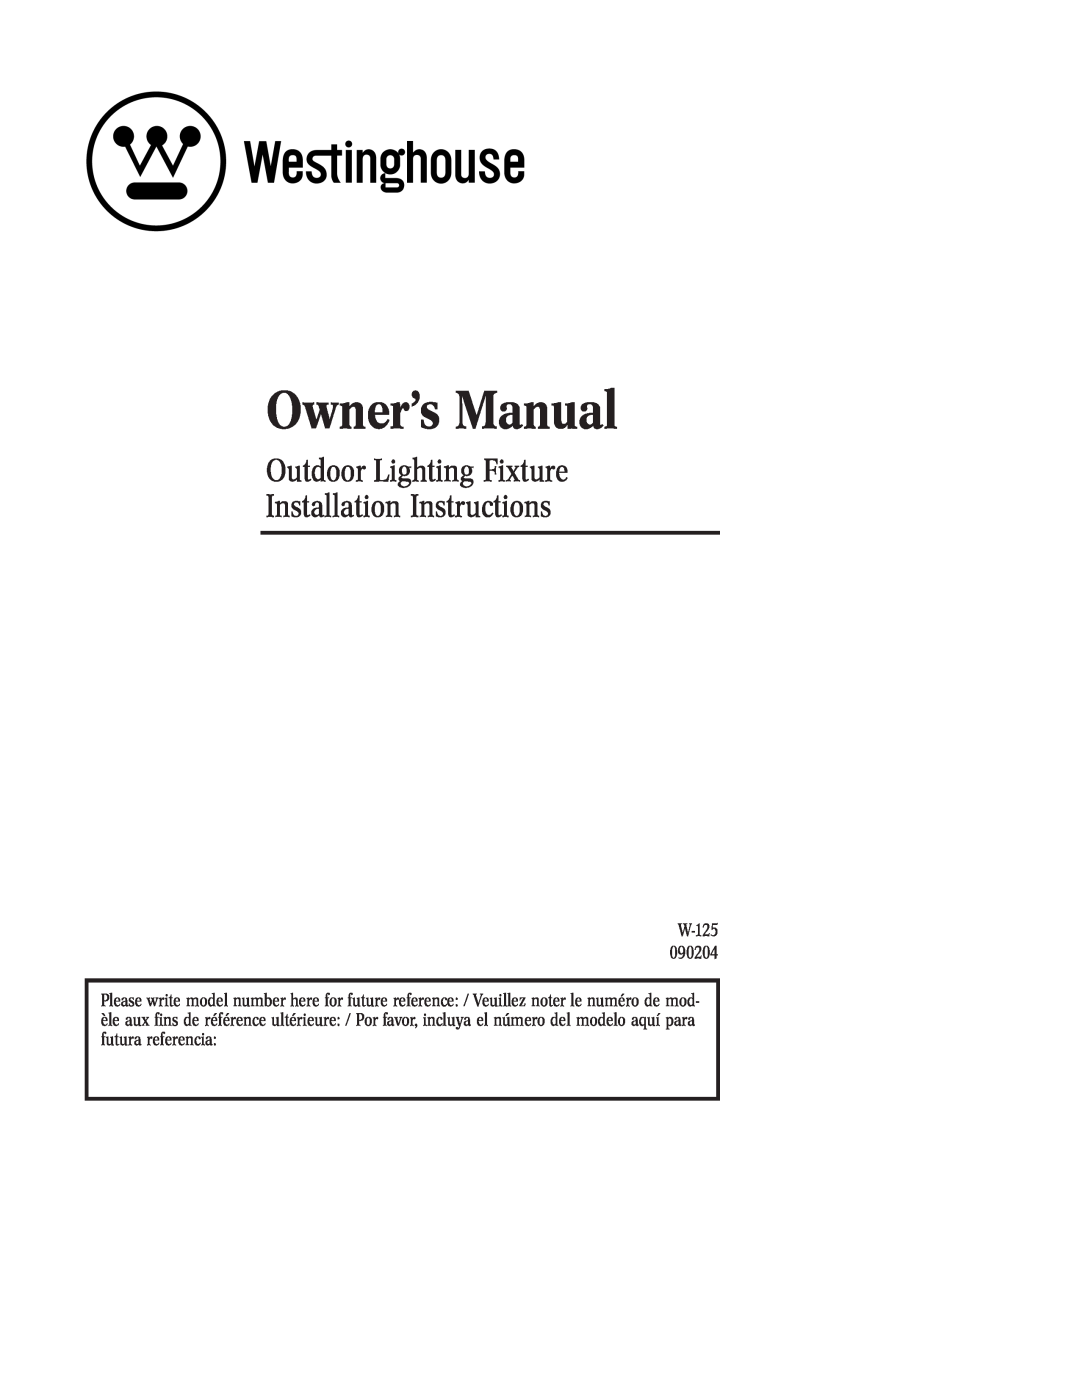 Westinghouse W-125 owner manual Outdoor Lighting Fixture, Installation Instructions 